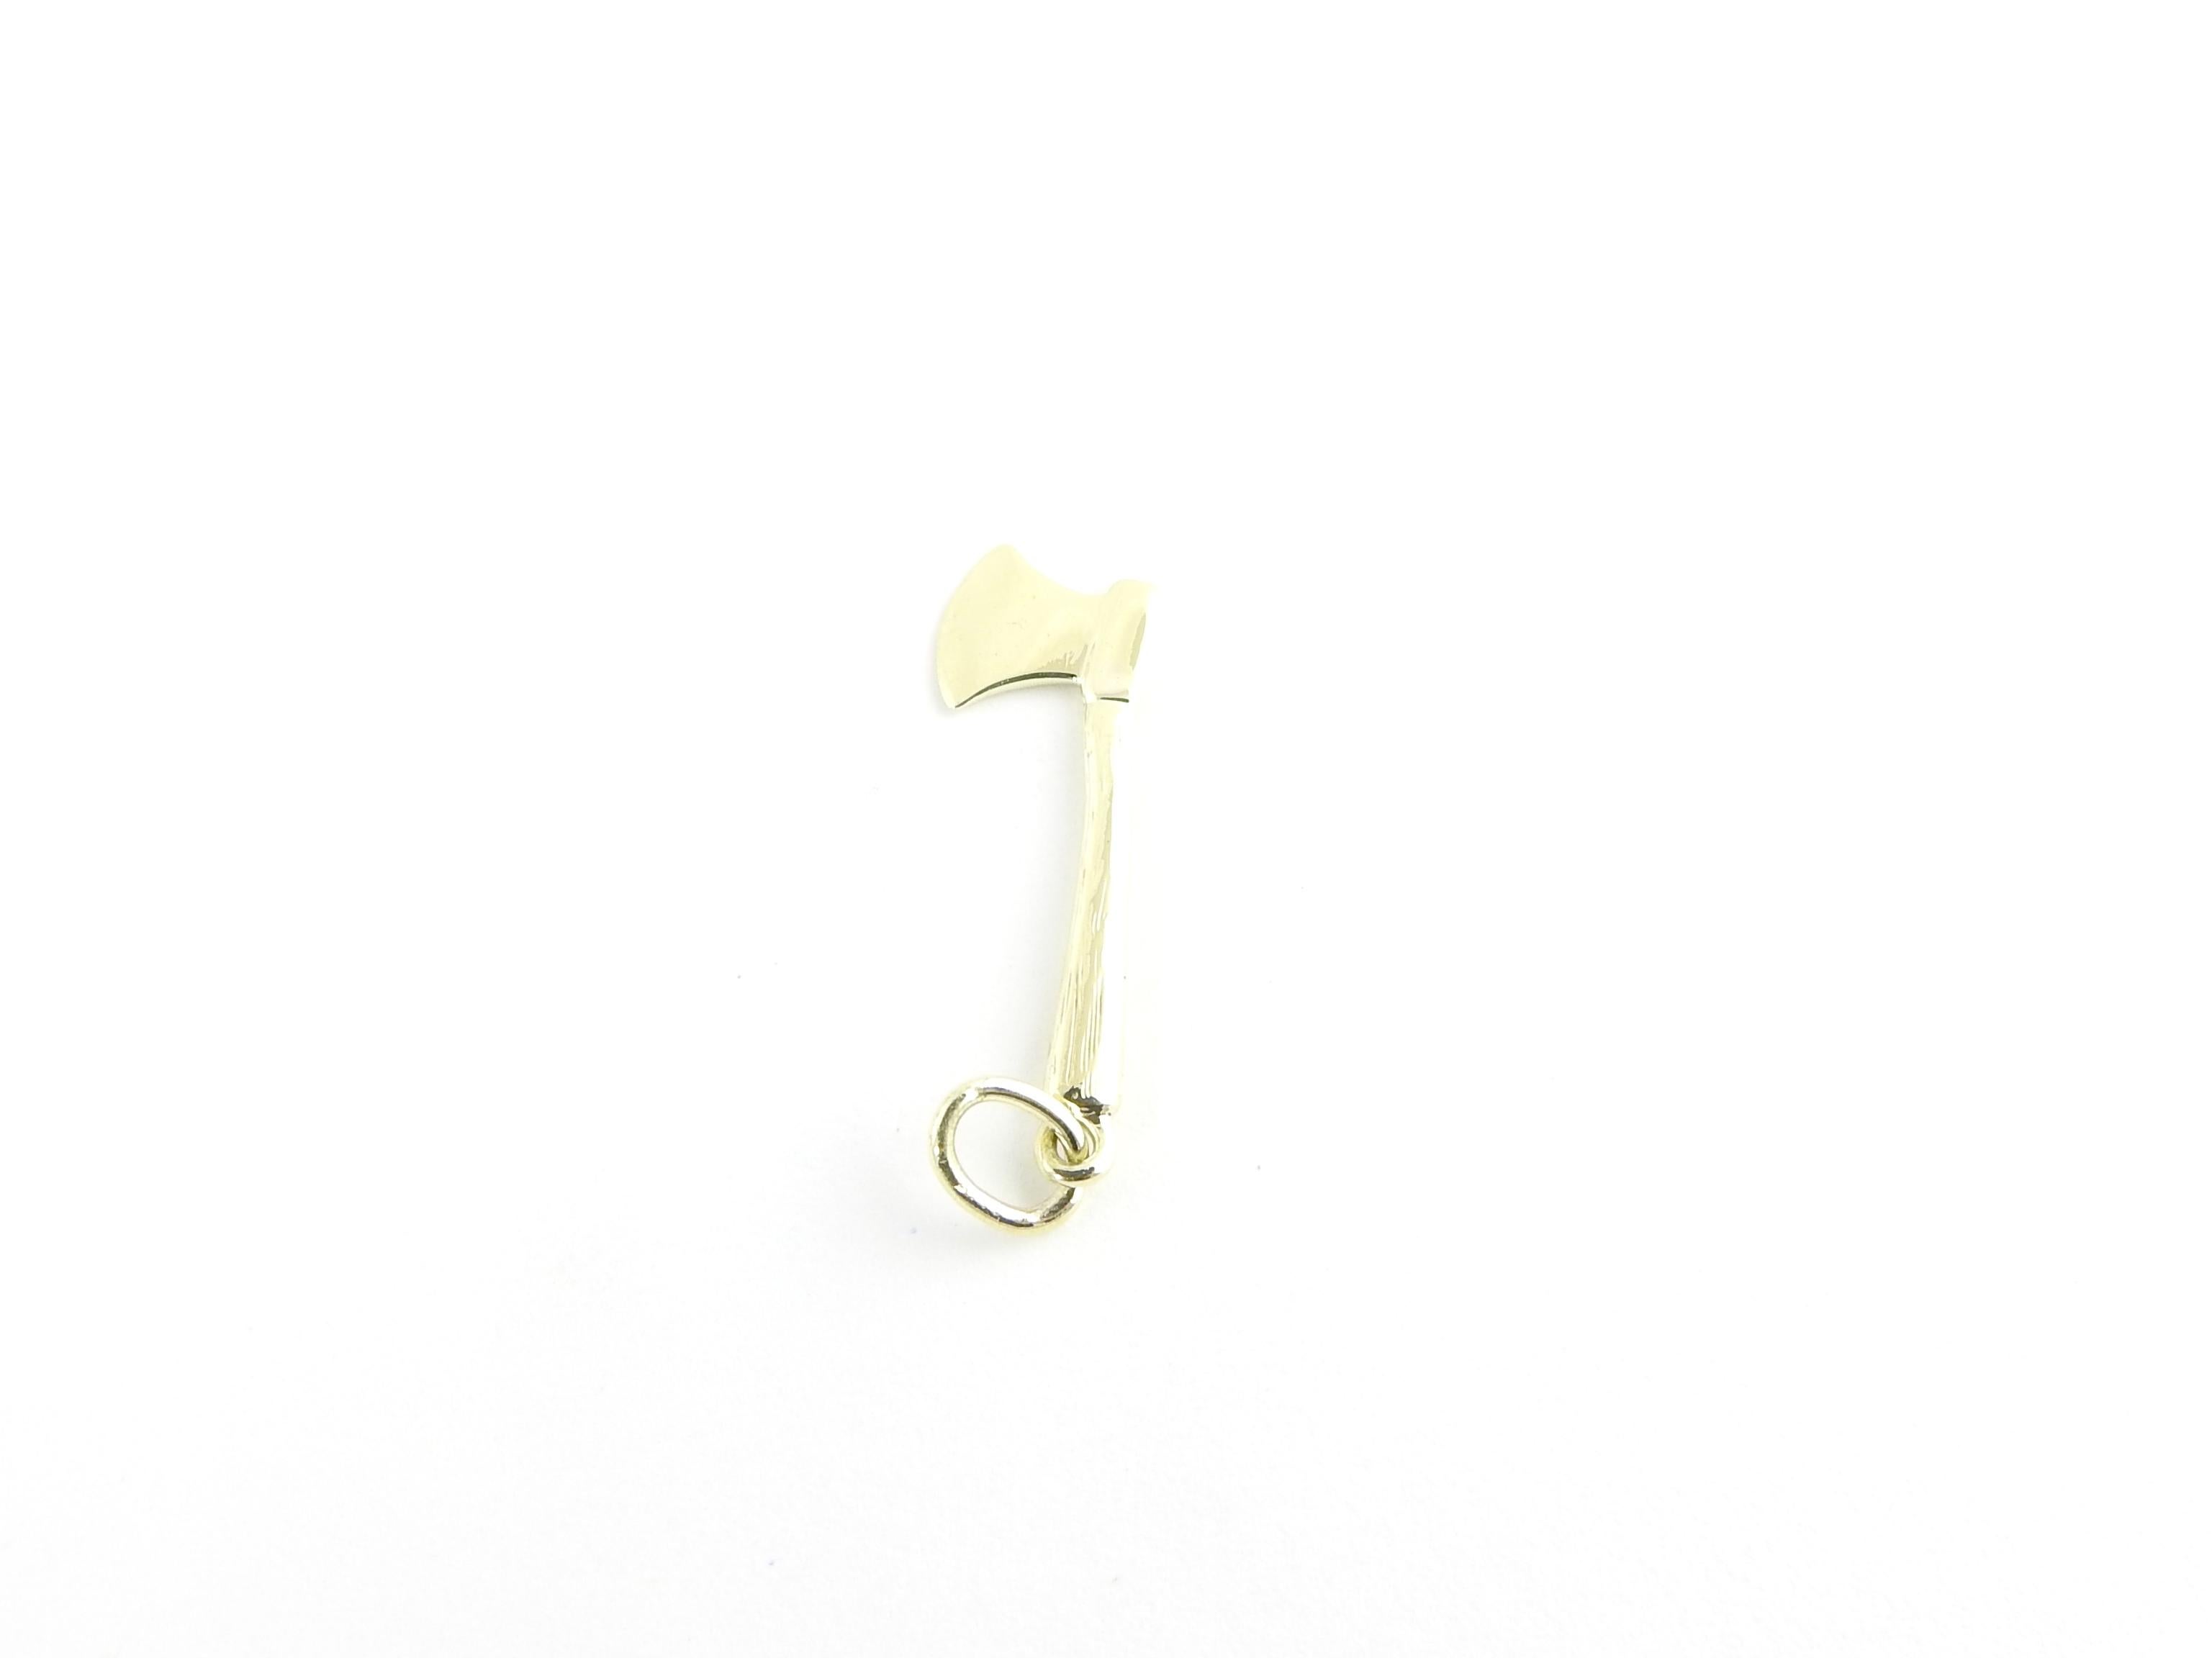 Vintage 14 Karat Yellow Gold Ax Charm

Timber!

This lovely charm features a miniature ax meticulously detailed in 14K yellow gold.

Size: 25 mm x 10 mm (actual charm)

Weight: 0.8 dwt. / 1.3 gr.

Acid tested for 14K gold.

Very good condition,